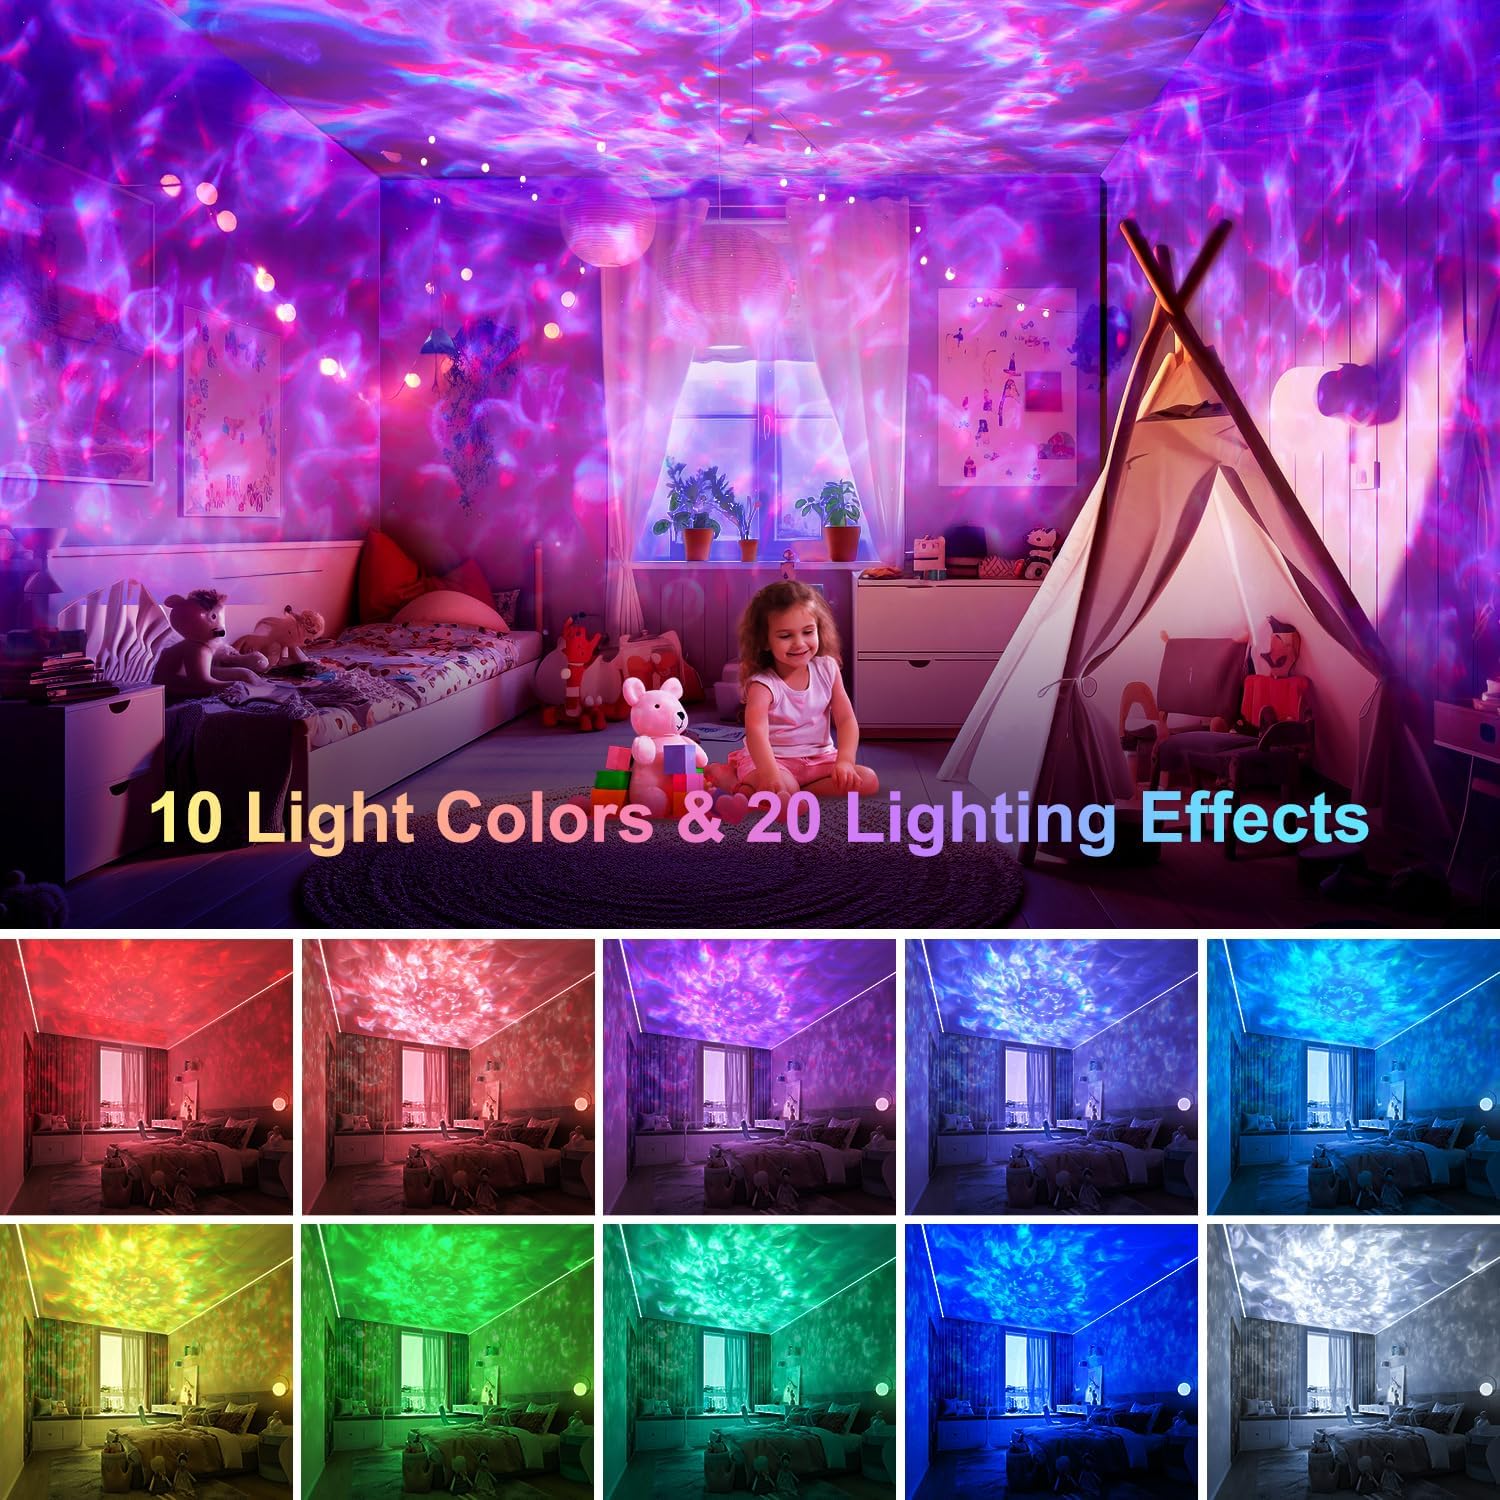 Galaxy Projector 20 Lighting Modes Star Projector, HiFi Bluetooth Speaker Galaxy Projector Light, 6 White Noise Sensory Lights, Remote & Timer Galaxy Light Projector for Bedroom Gifts for Room Decor [Energy Class A] 1